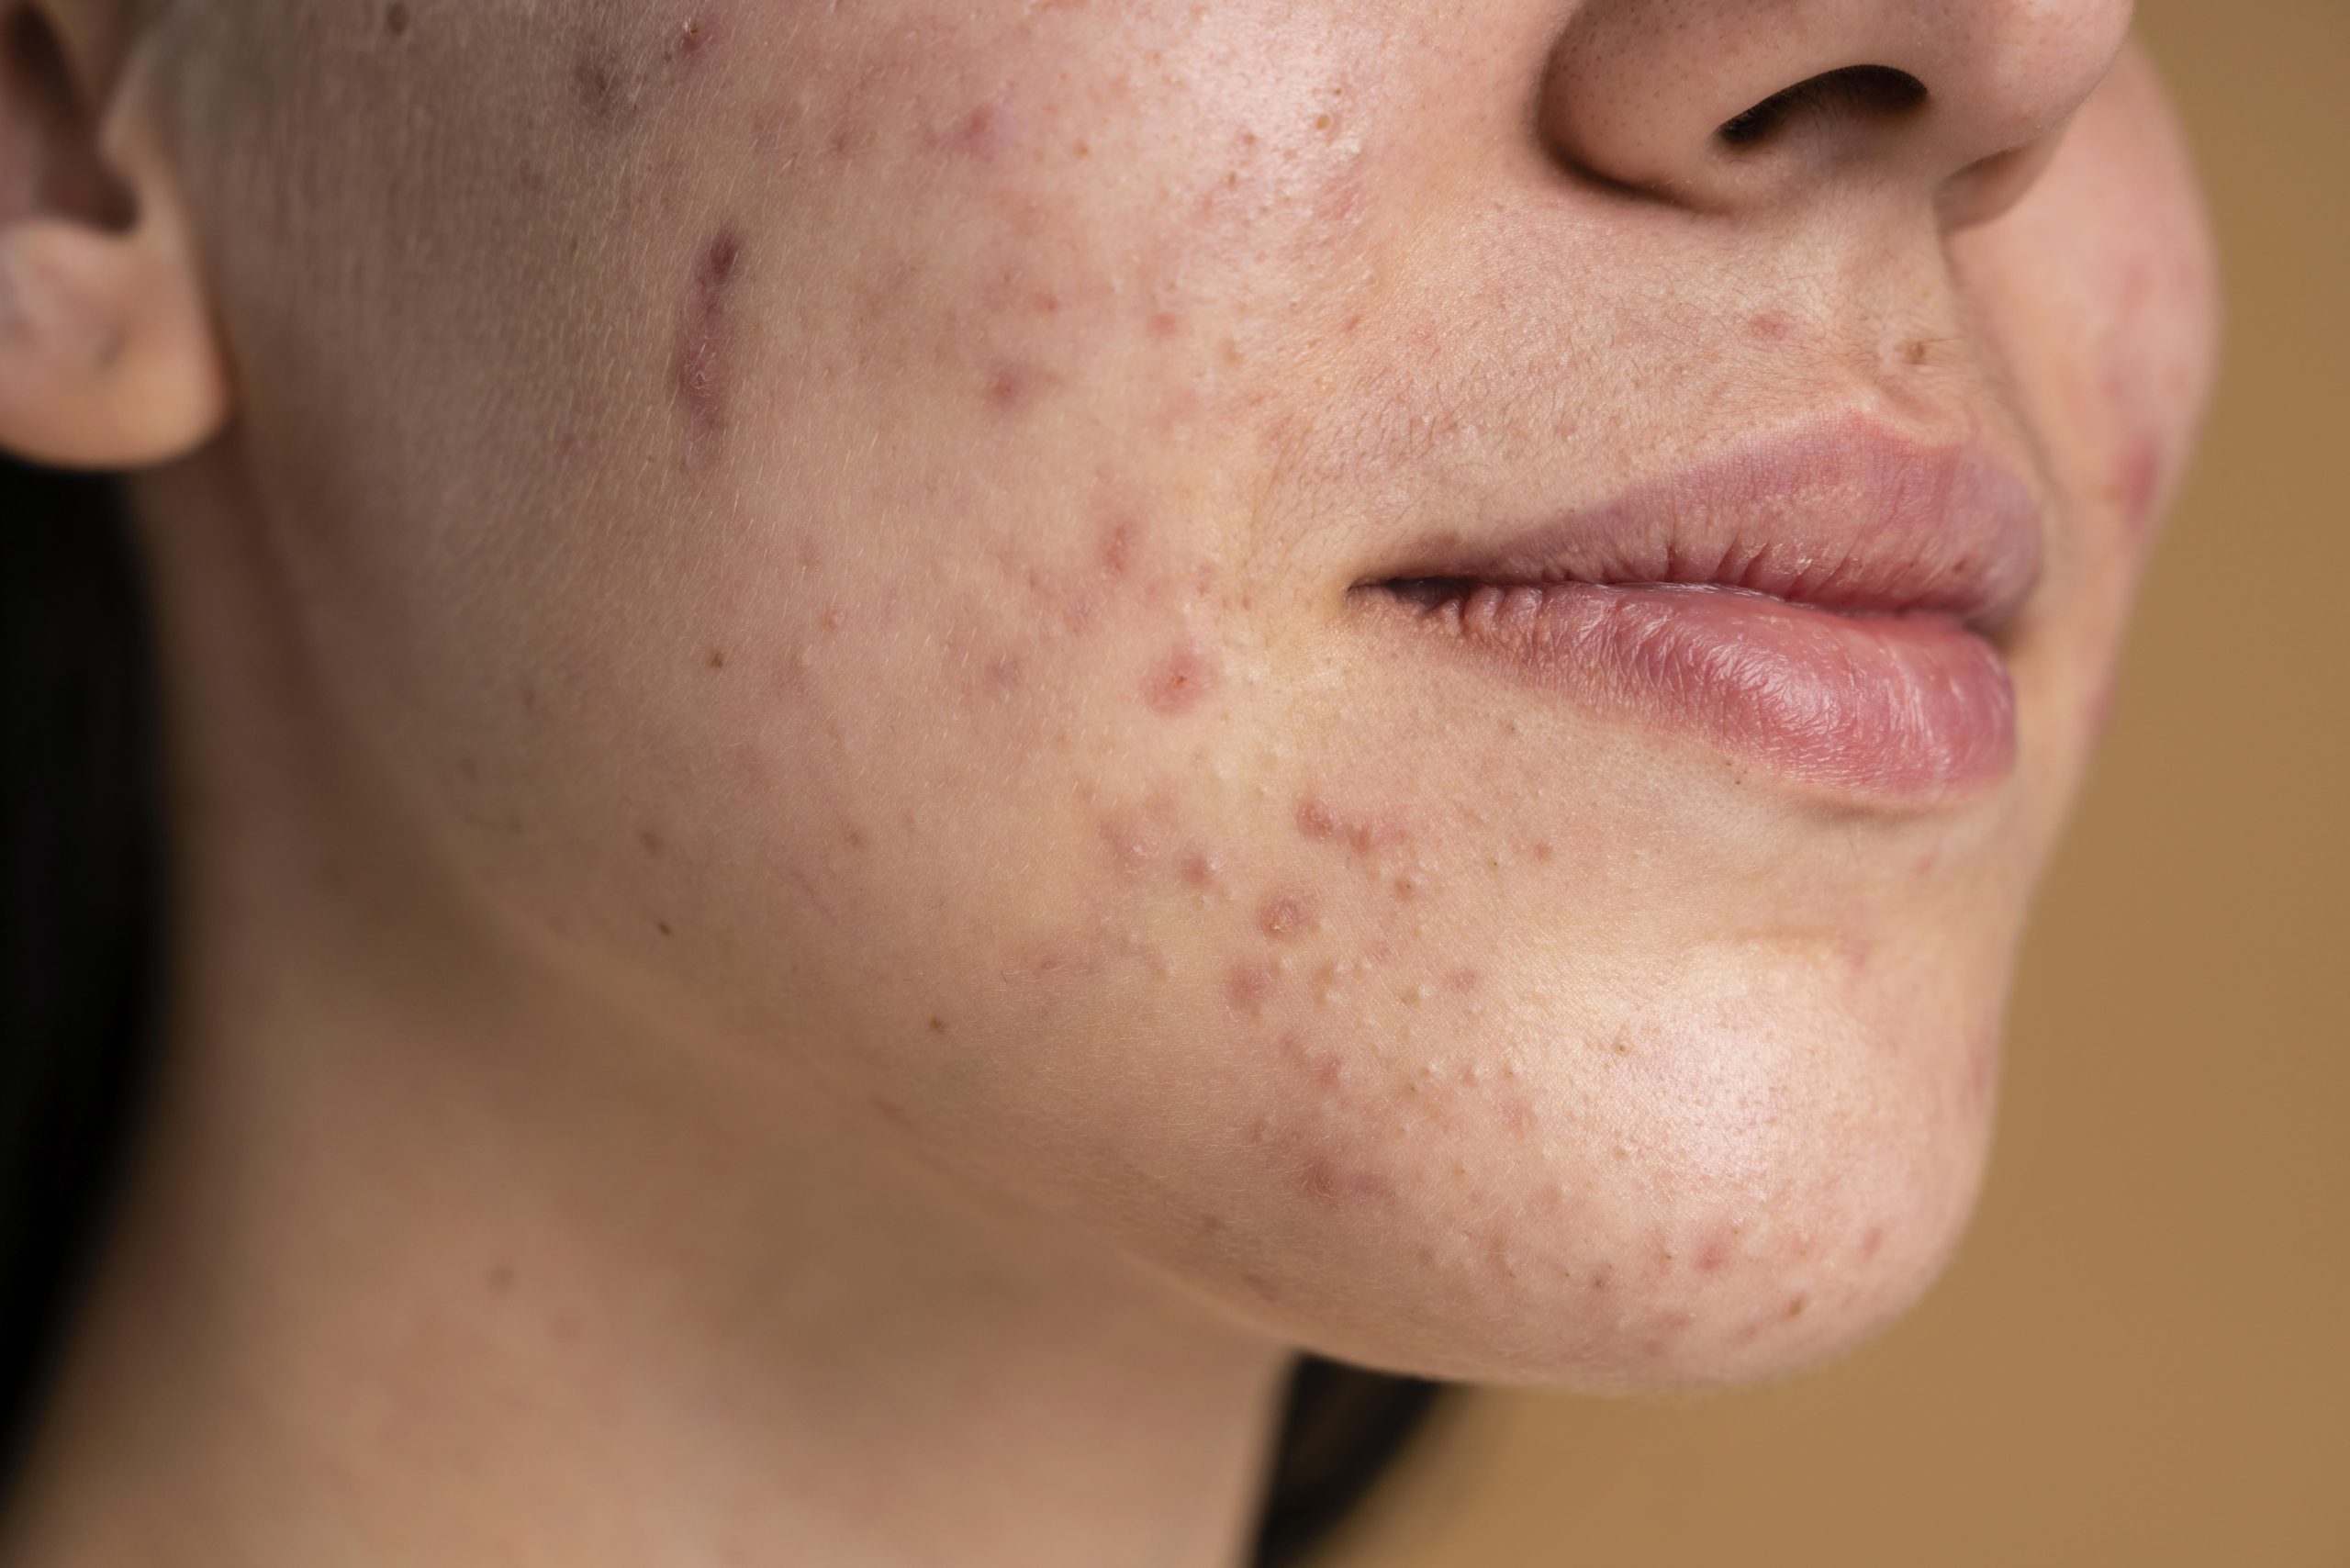 Food that cause acne